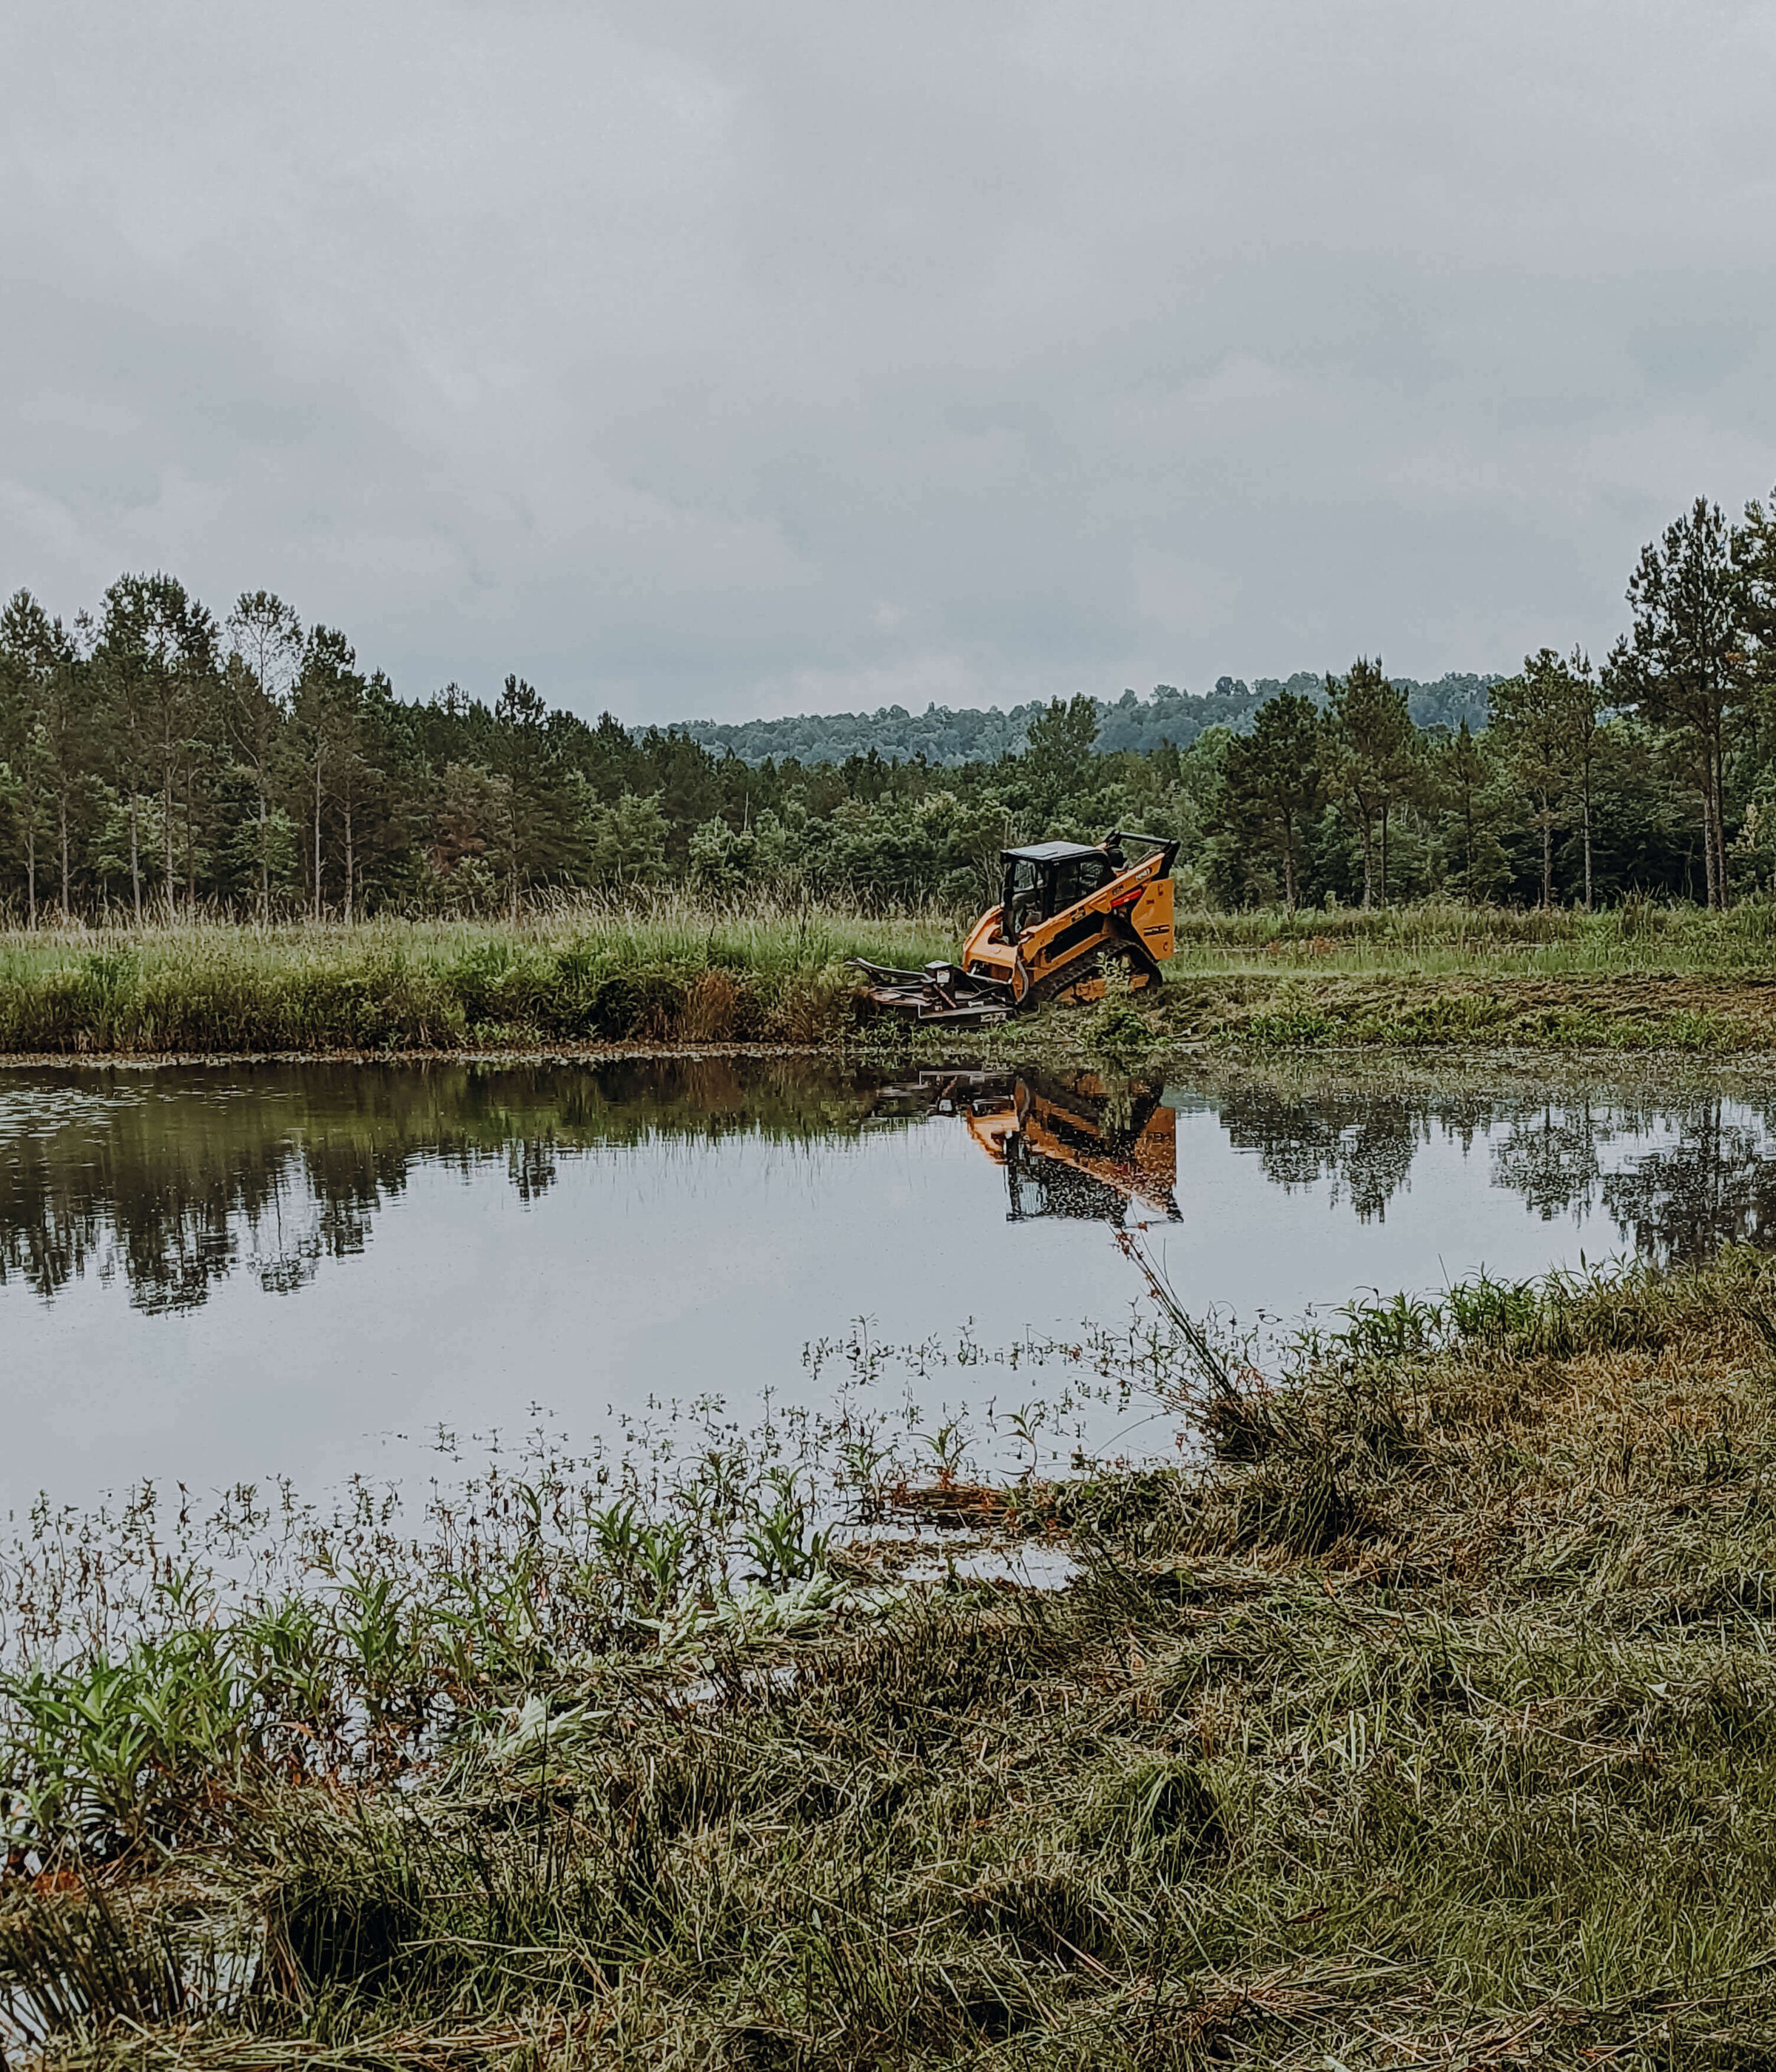 excavator-cleaning-edge-of-pond-on-a-cloudy-day